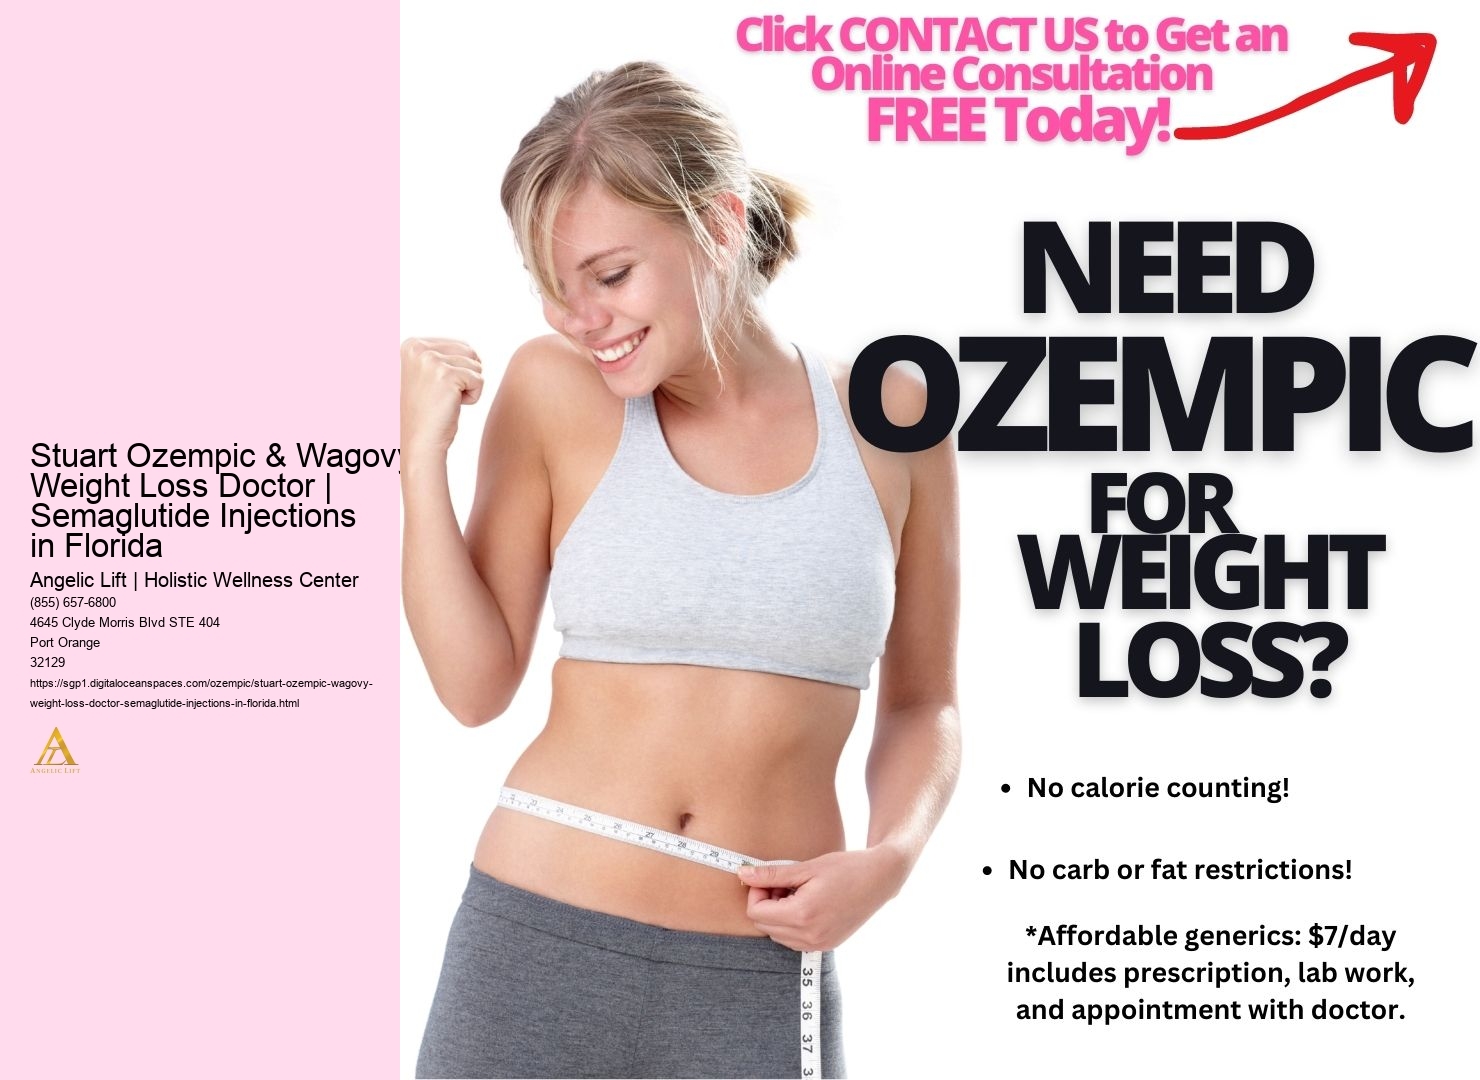 Stuart Ozempic & Wagovy Weight Loss Doctor | Semaglutide Injections in Florida